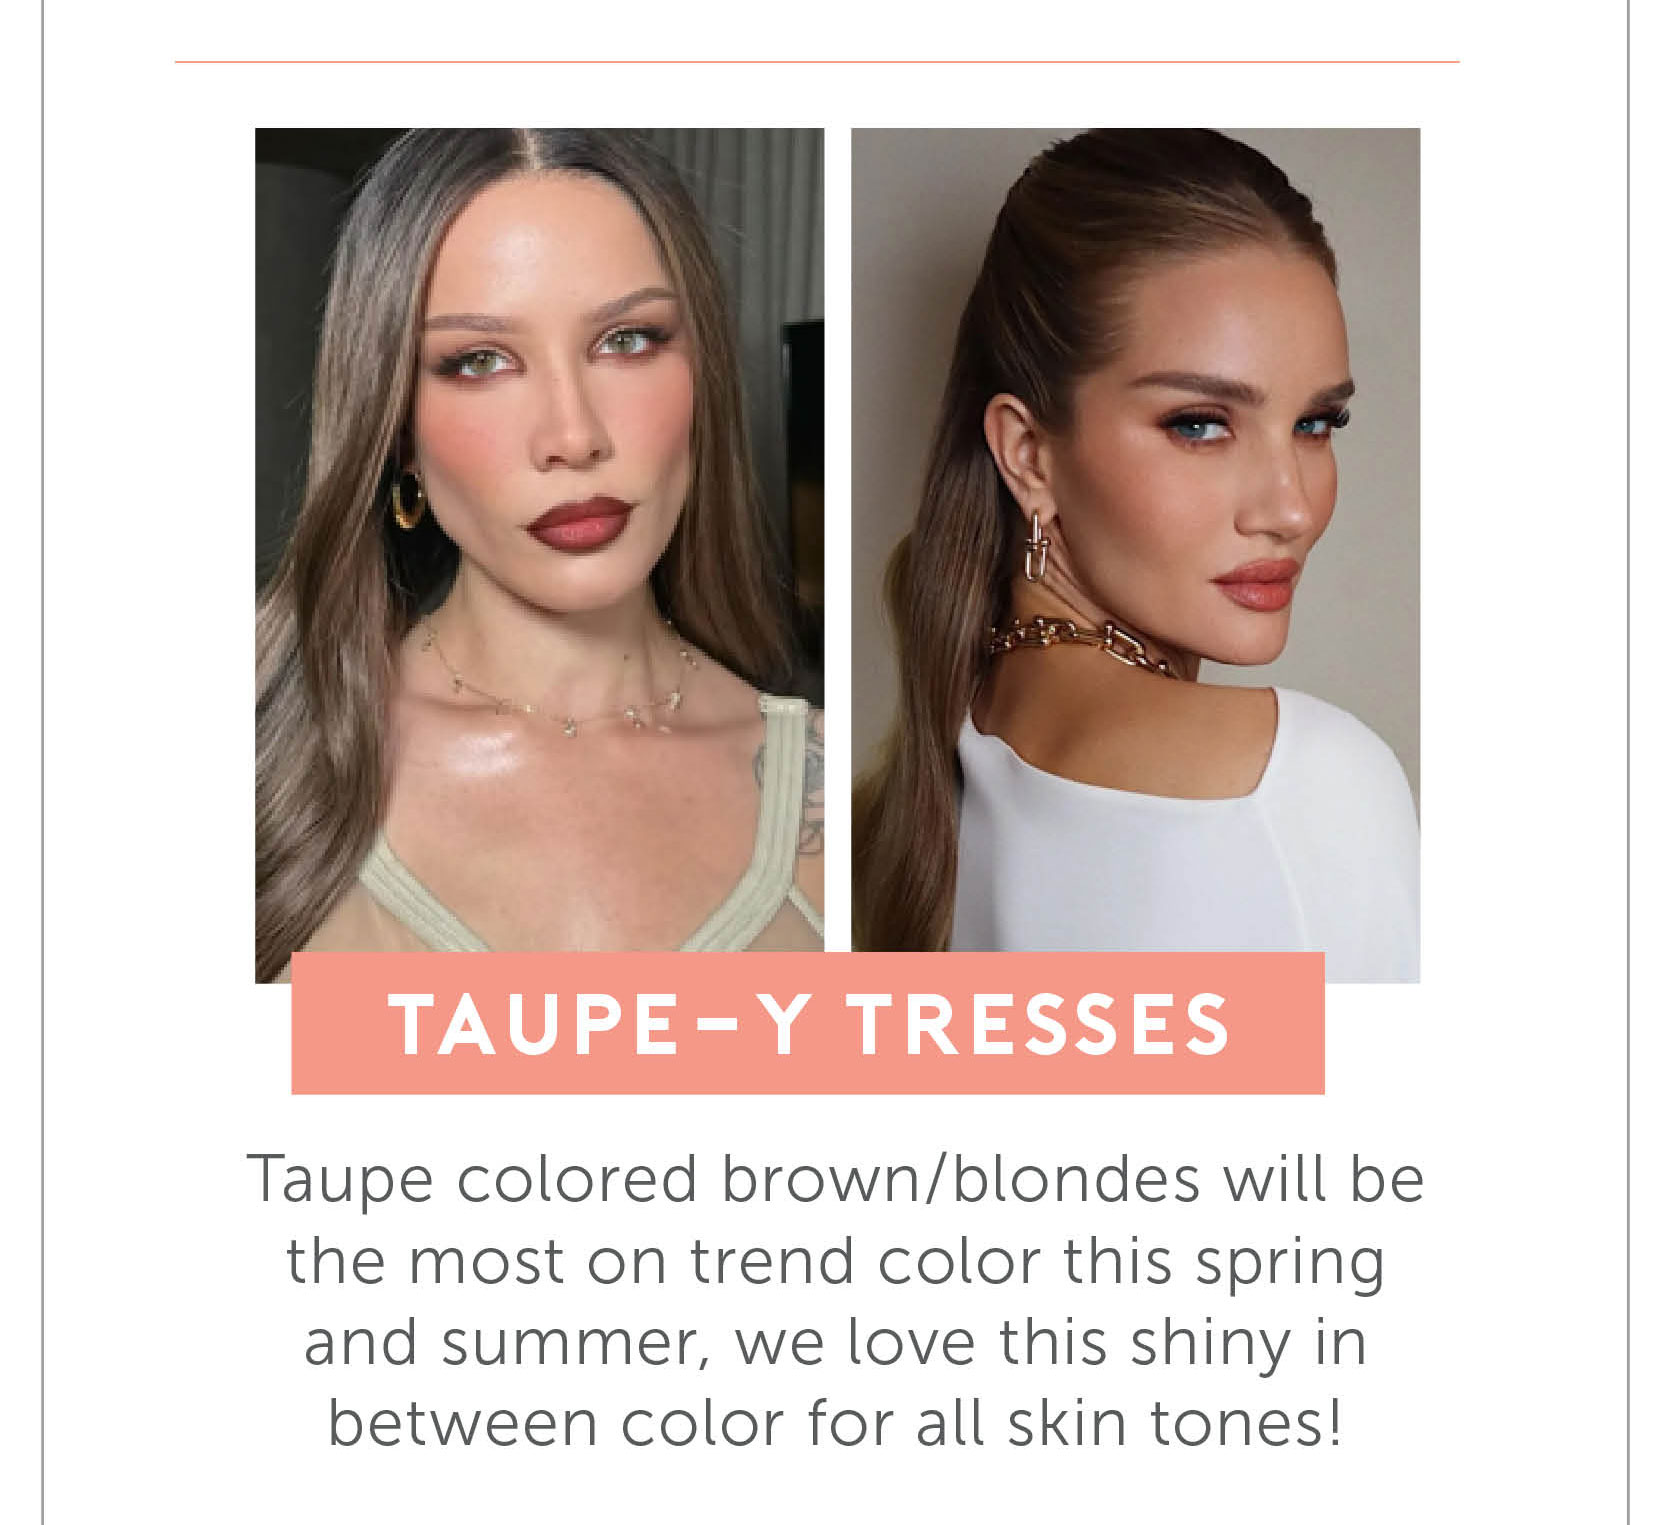 Taupe-y Tresses - Taupe colored brown/blondes will be the most on trend color this spring and summer, we love this shiny in between color for all skin tones! 